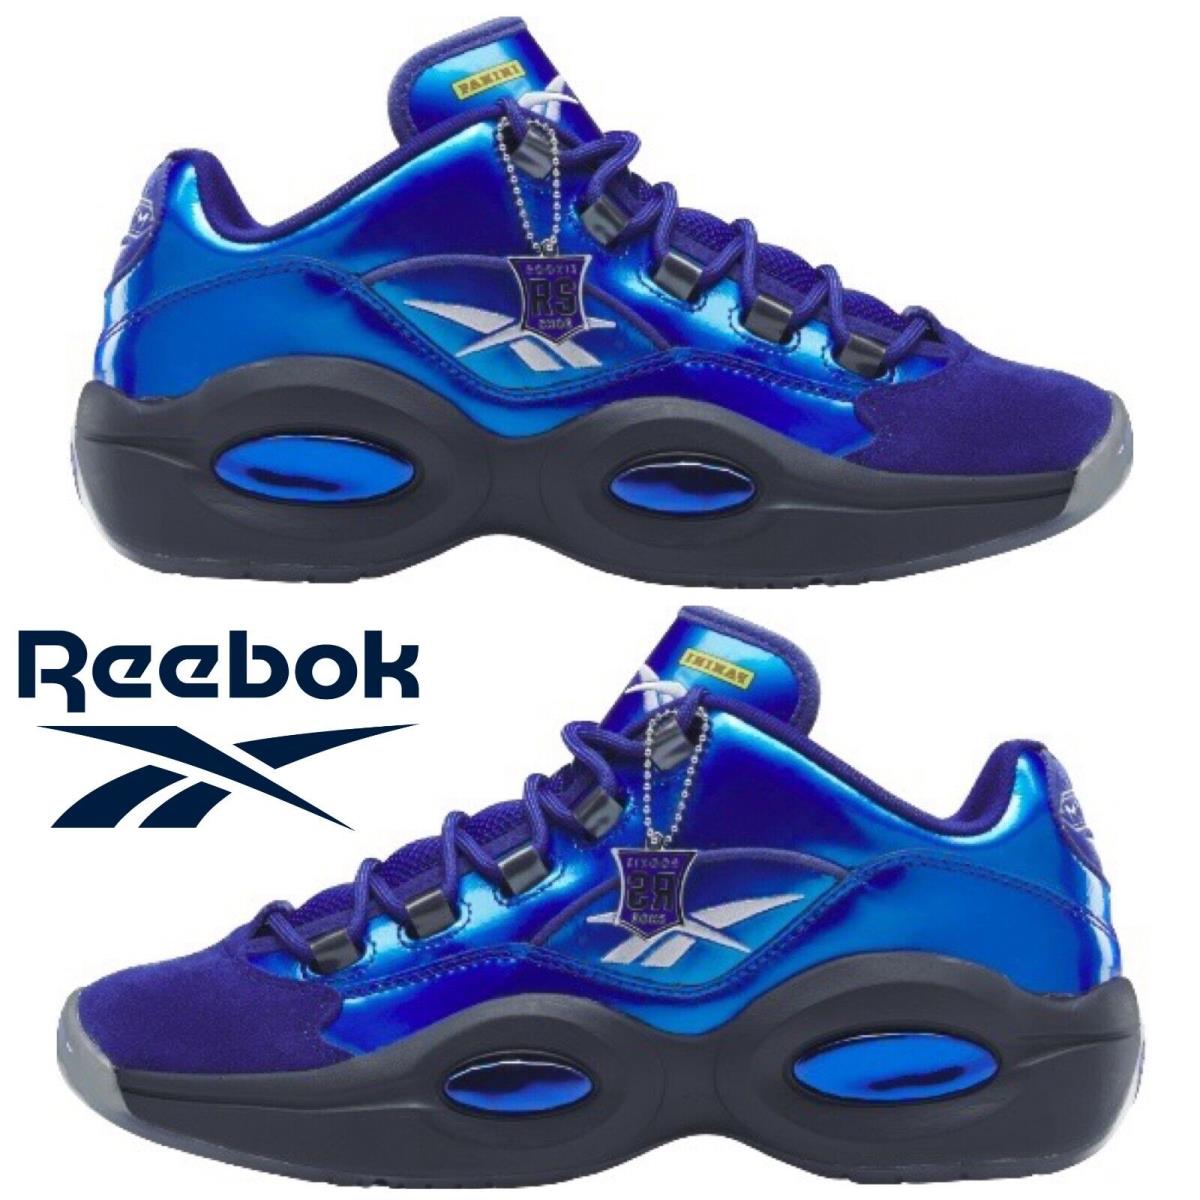 Reebok Question Low Panini Basketball Shoes Men`s Sneakers Running Casual Sport